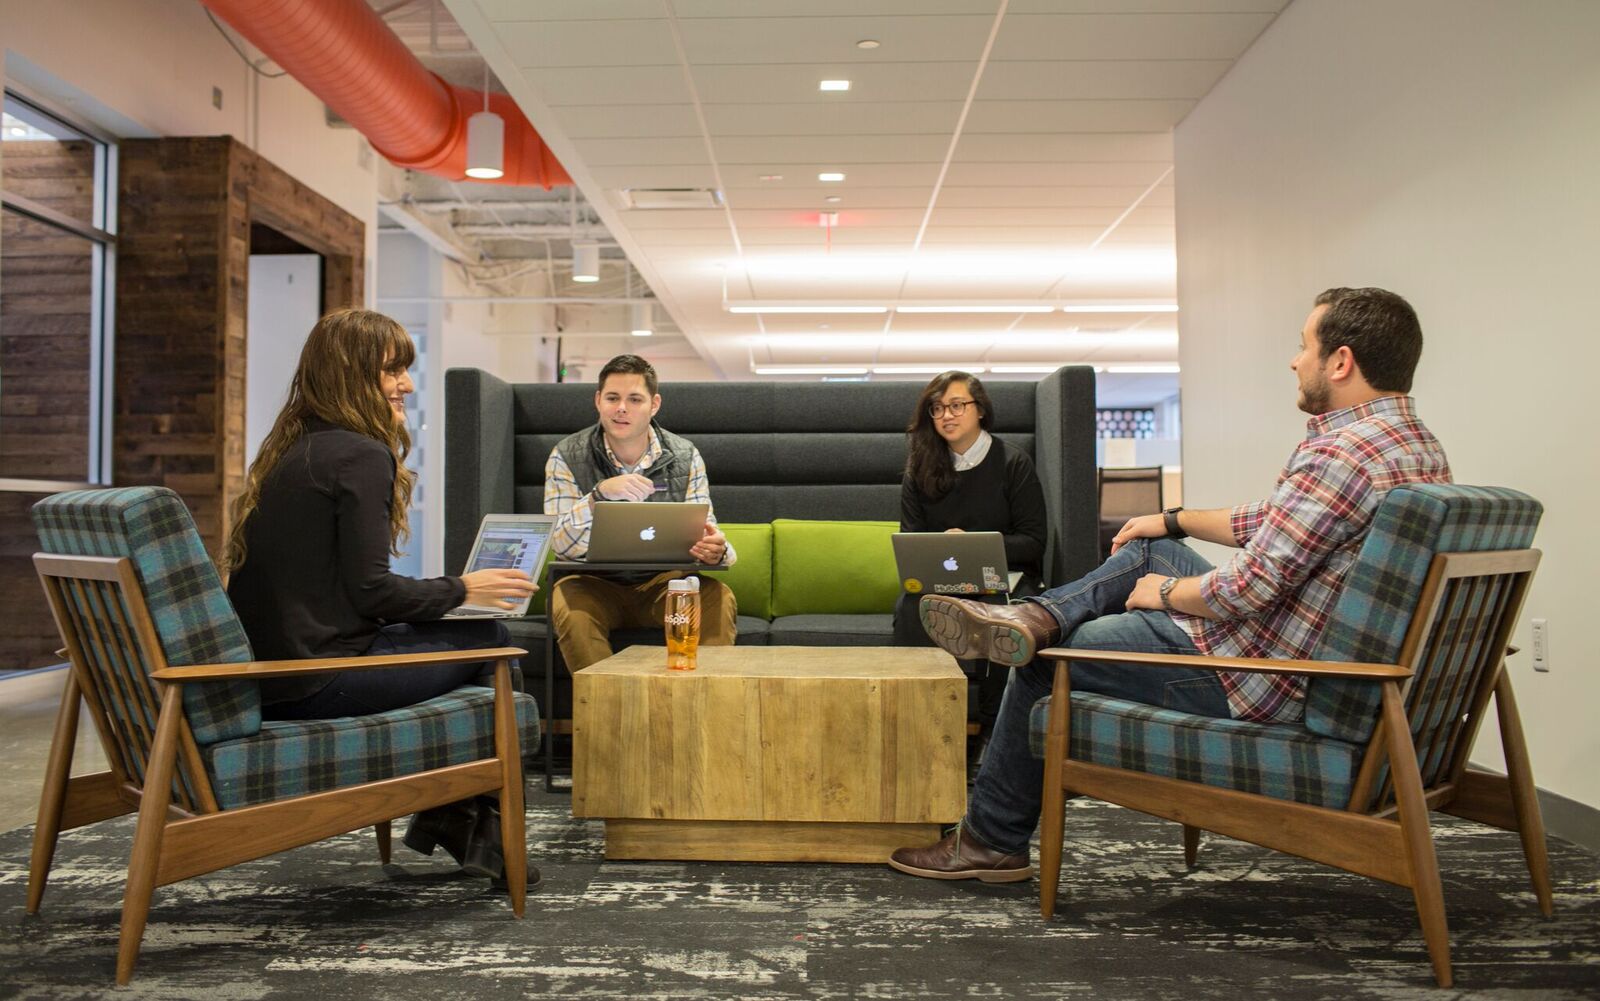 HubSpot Named The #2 Best Workplace in Technology by Fortune, Great Place to Work